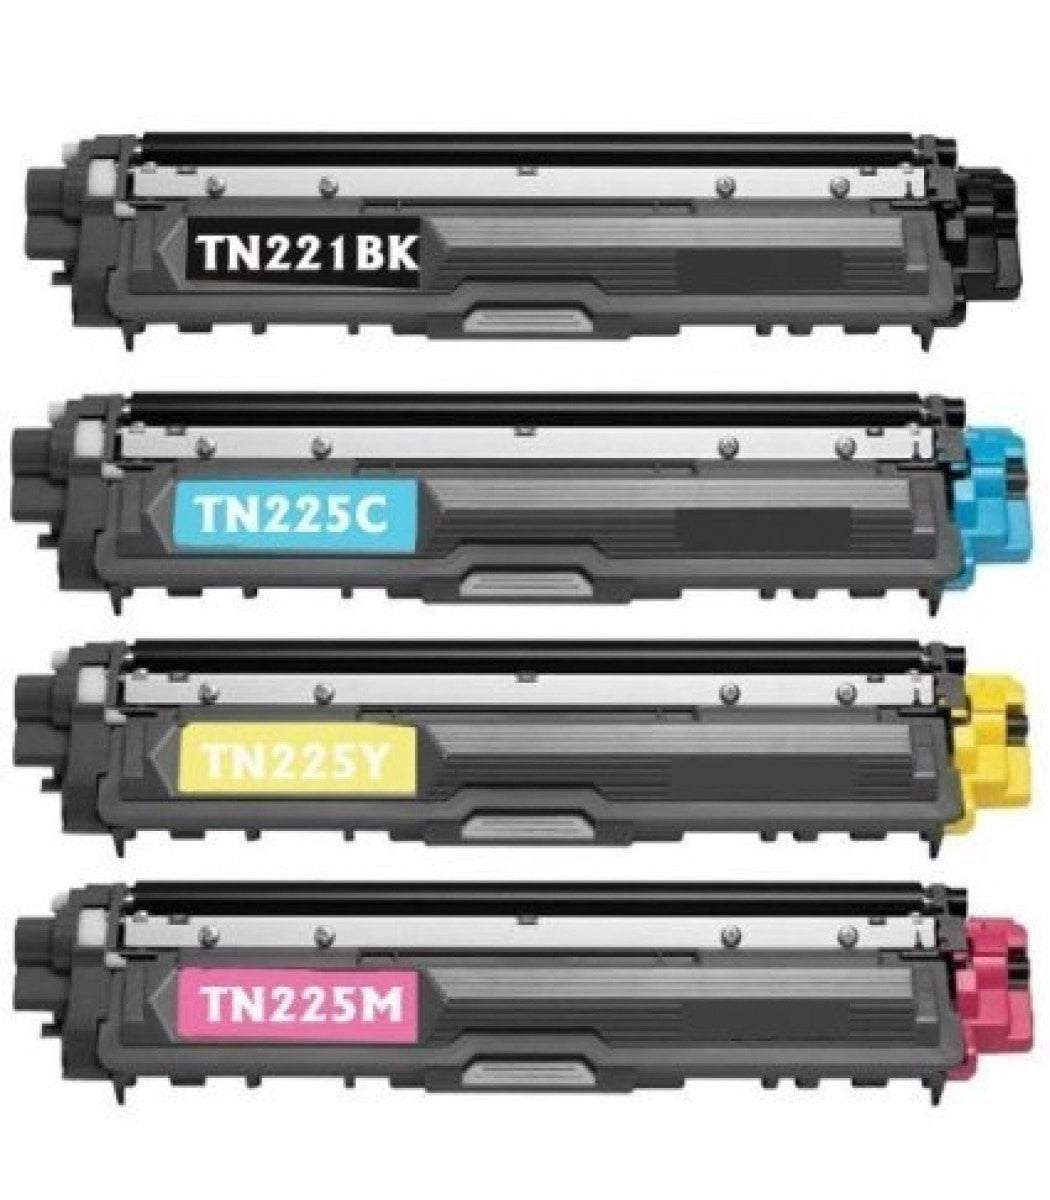 Absolute Toner Compatible 4 + 4 Brother TN-221 TN-225 High Yield Toner + DR-221 Drum Unit Cartridge Combo Brother Toner Cartridges